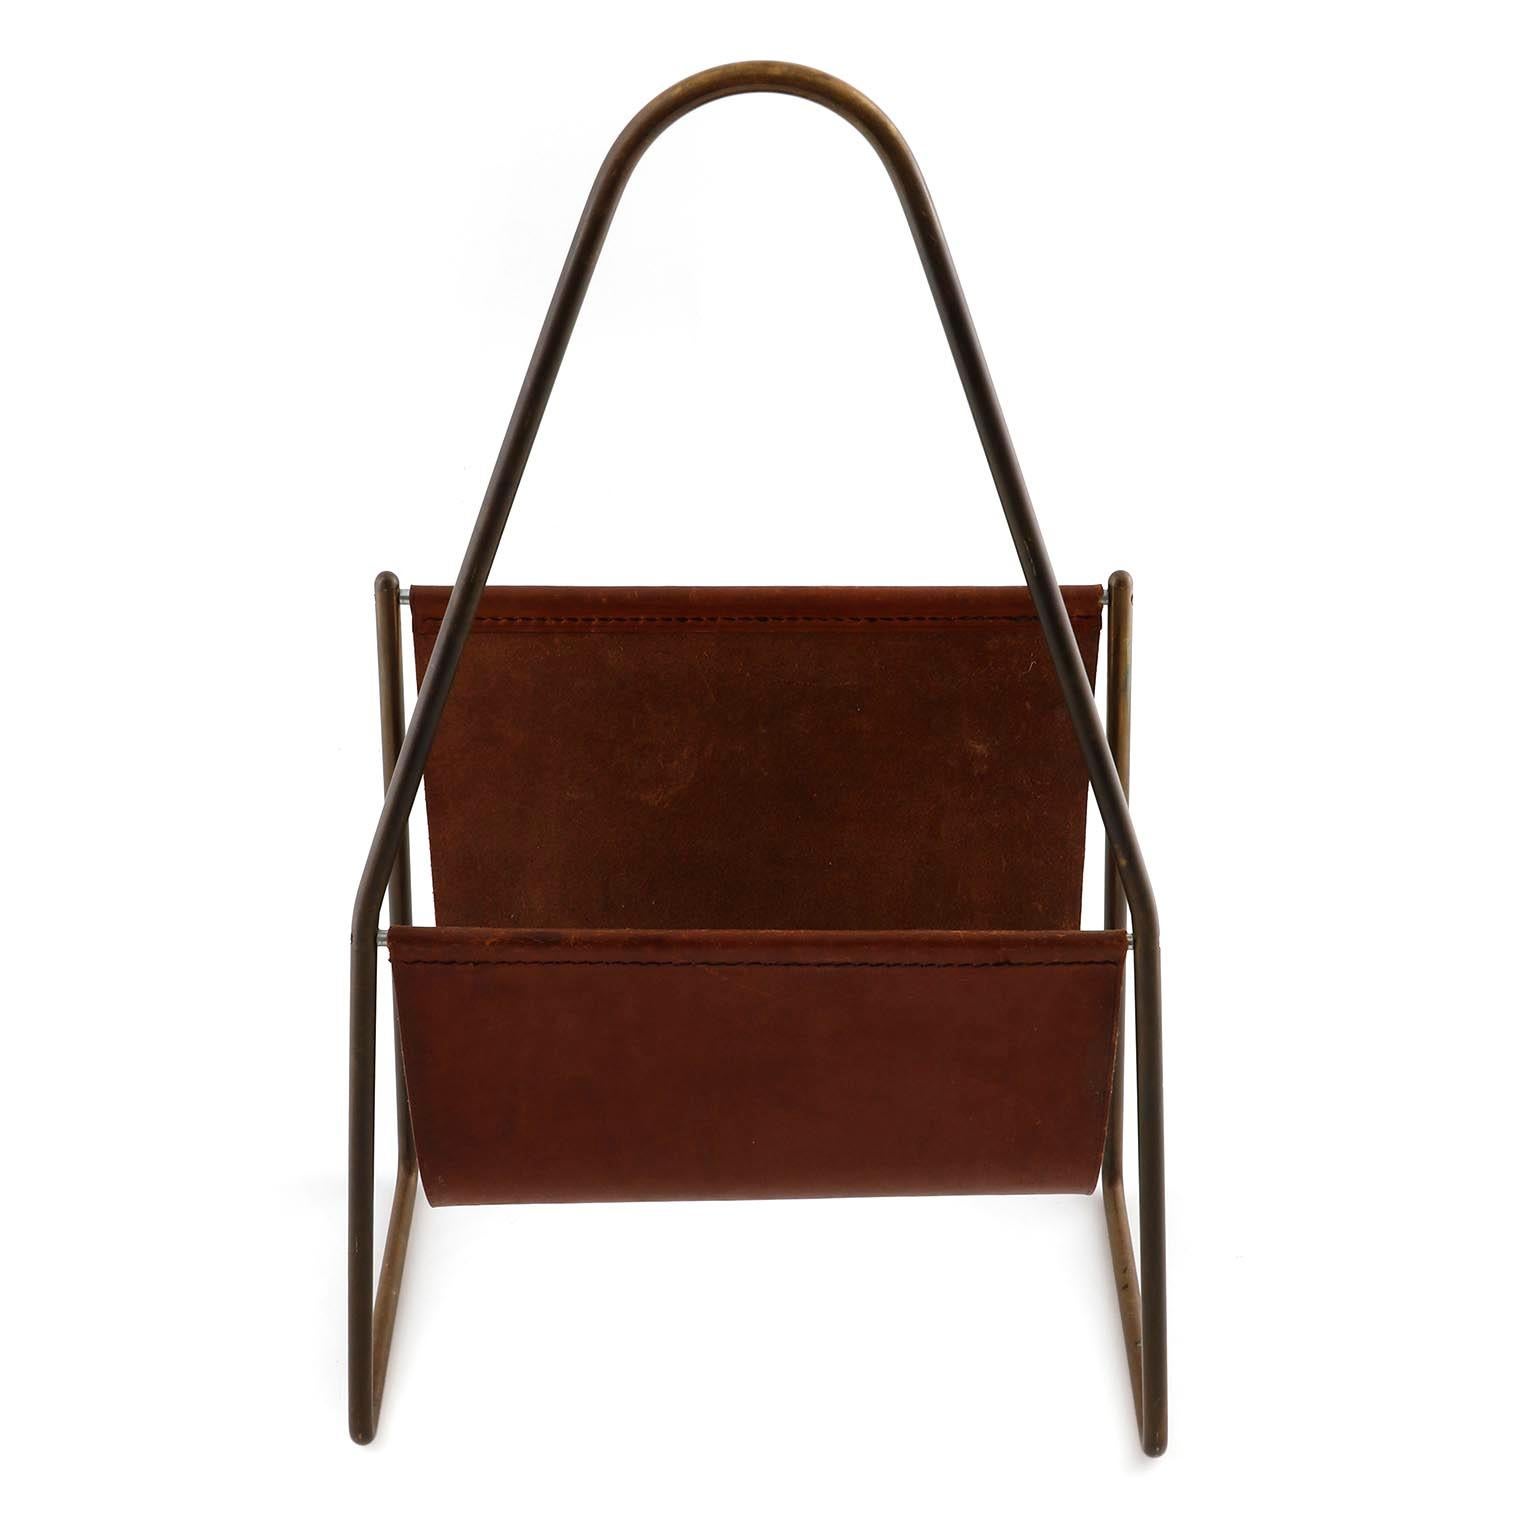 Austrian Carl Auböck Newspaper Magazine Rack Stand Tray, Patinated Brass Leather, 1950s